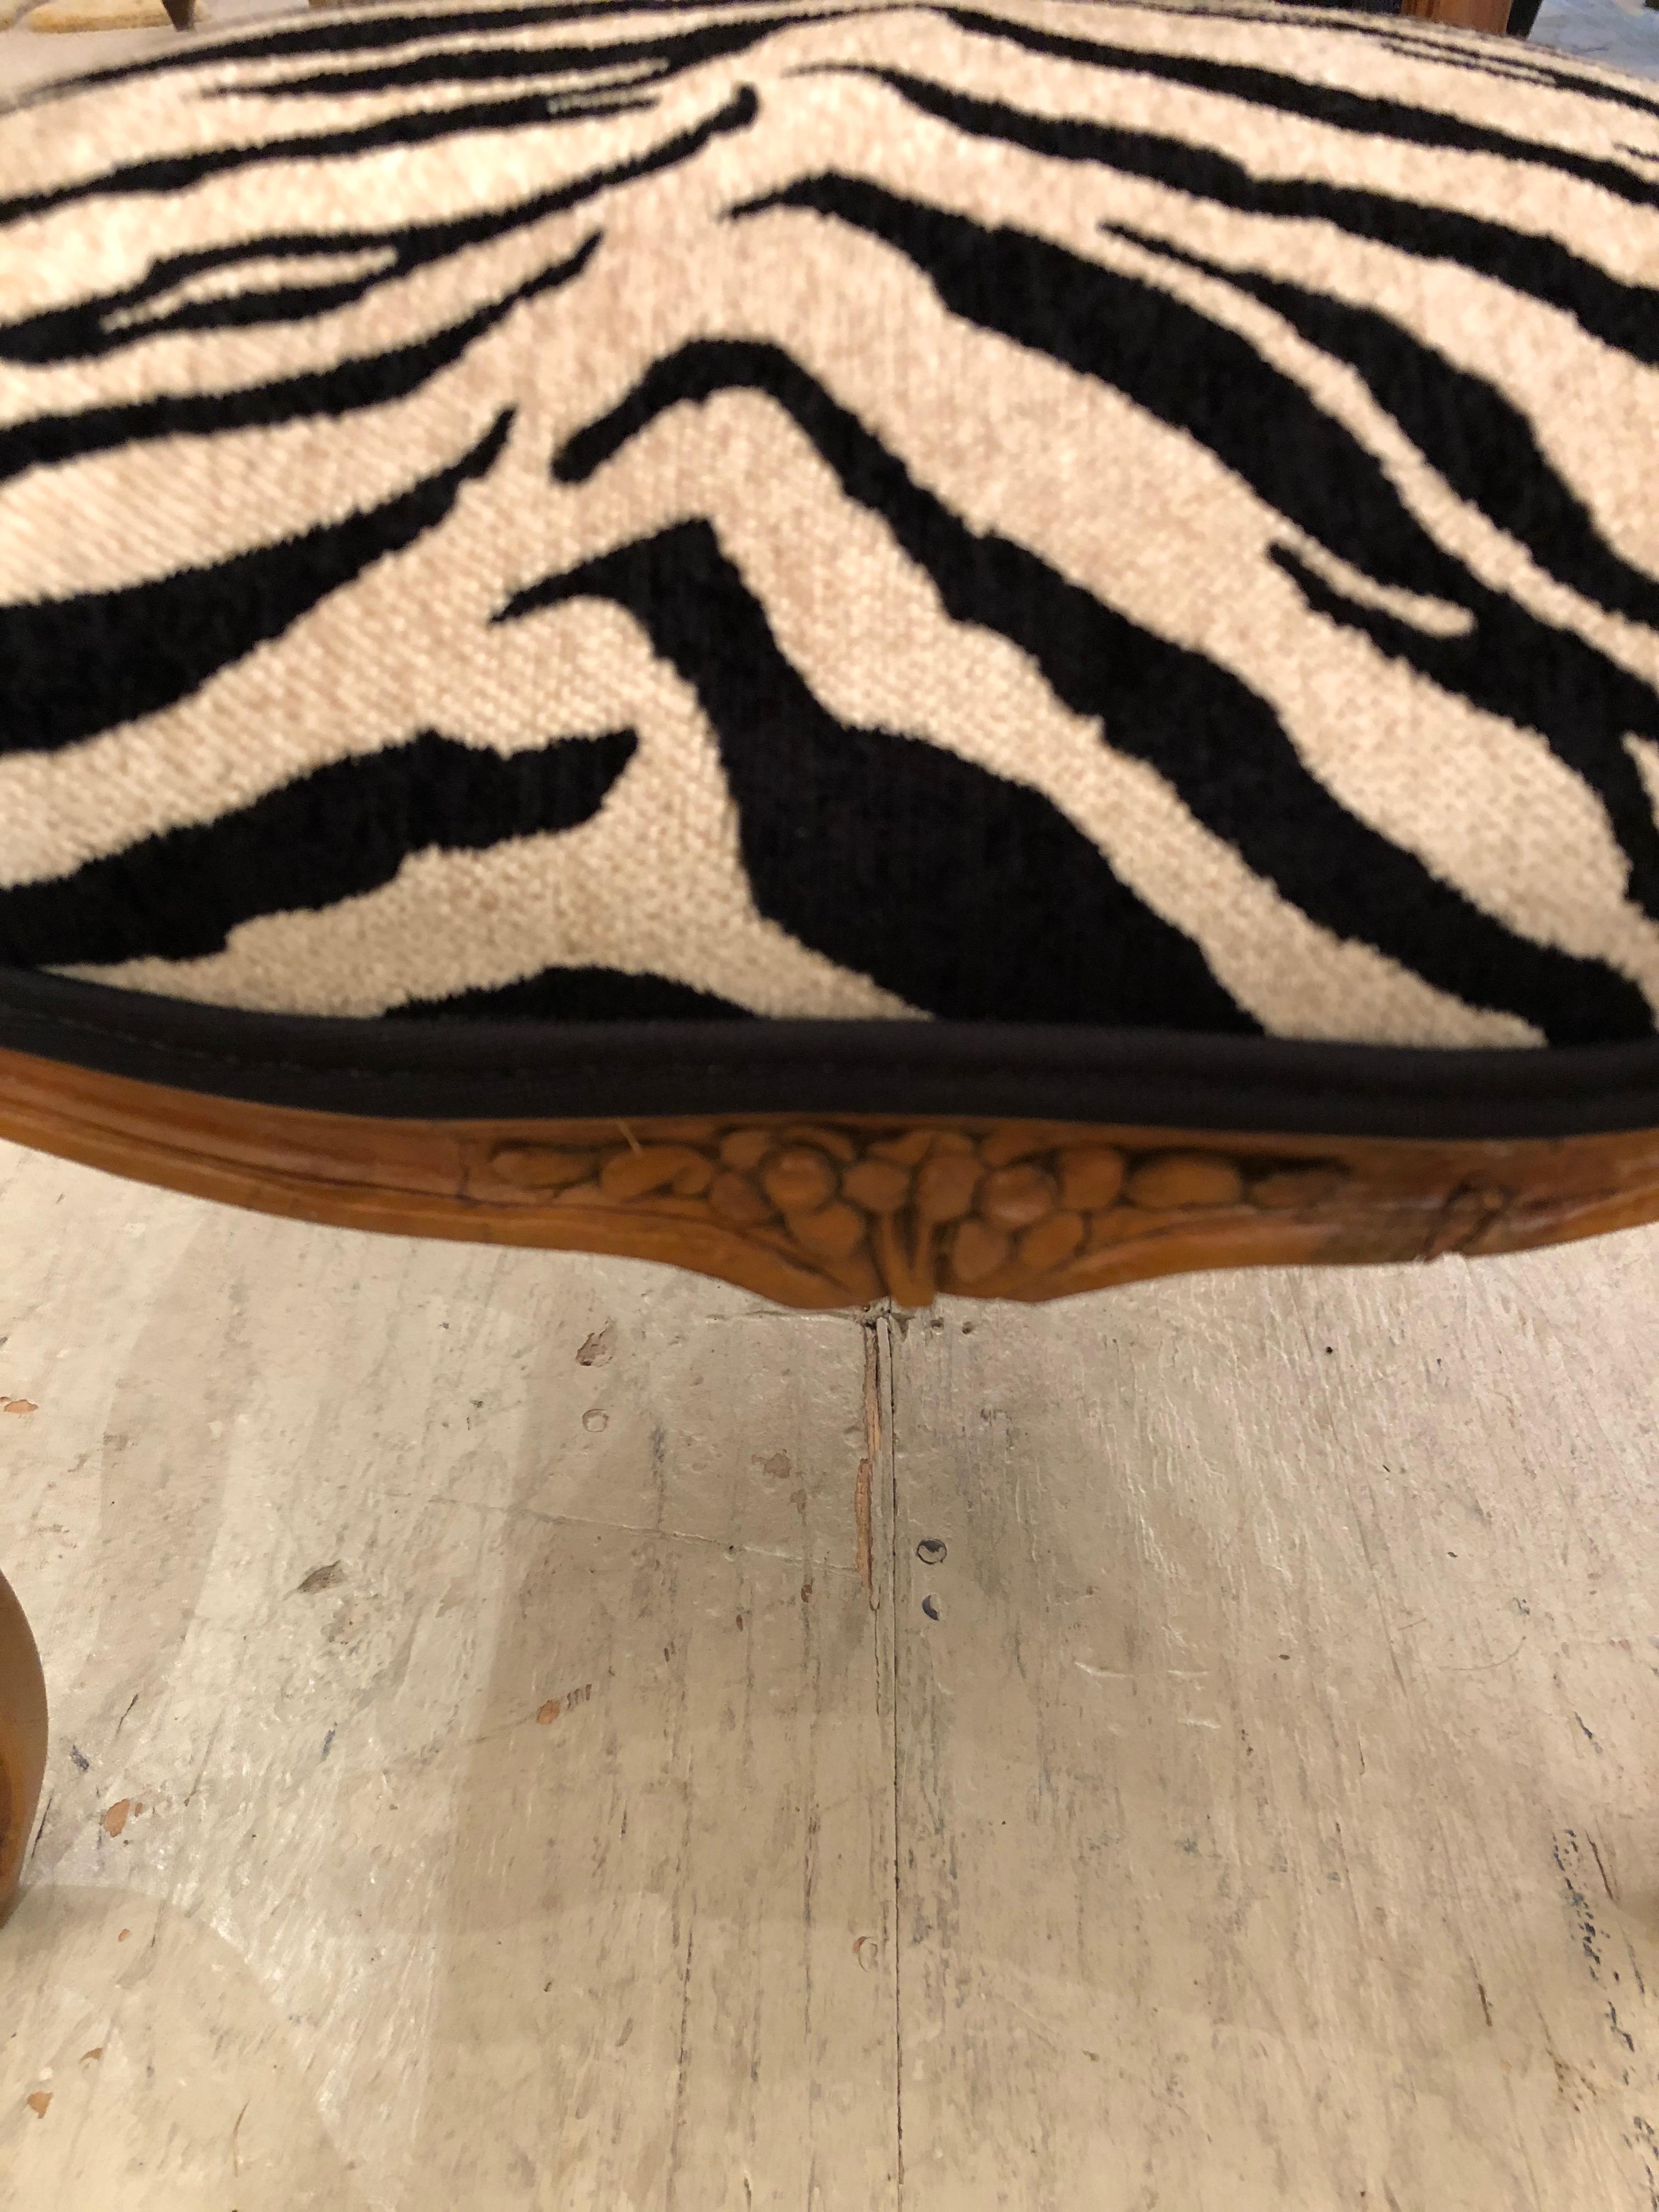 Diminutive vintage French armchair for a lucky child, having carved wood frame and new faux zebra chenille upholstery. Measures: seat height 12.